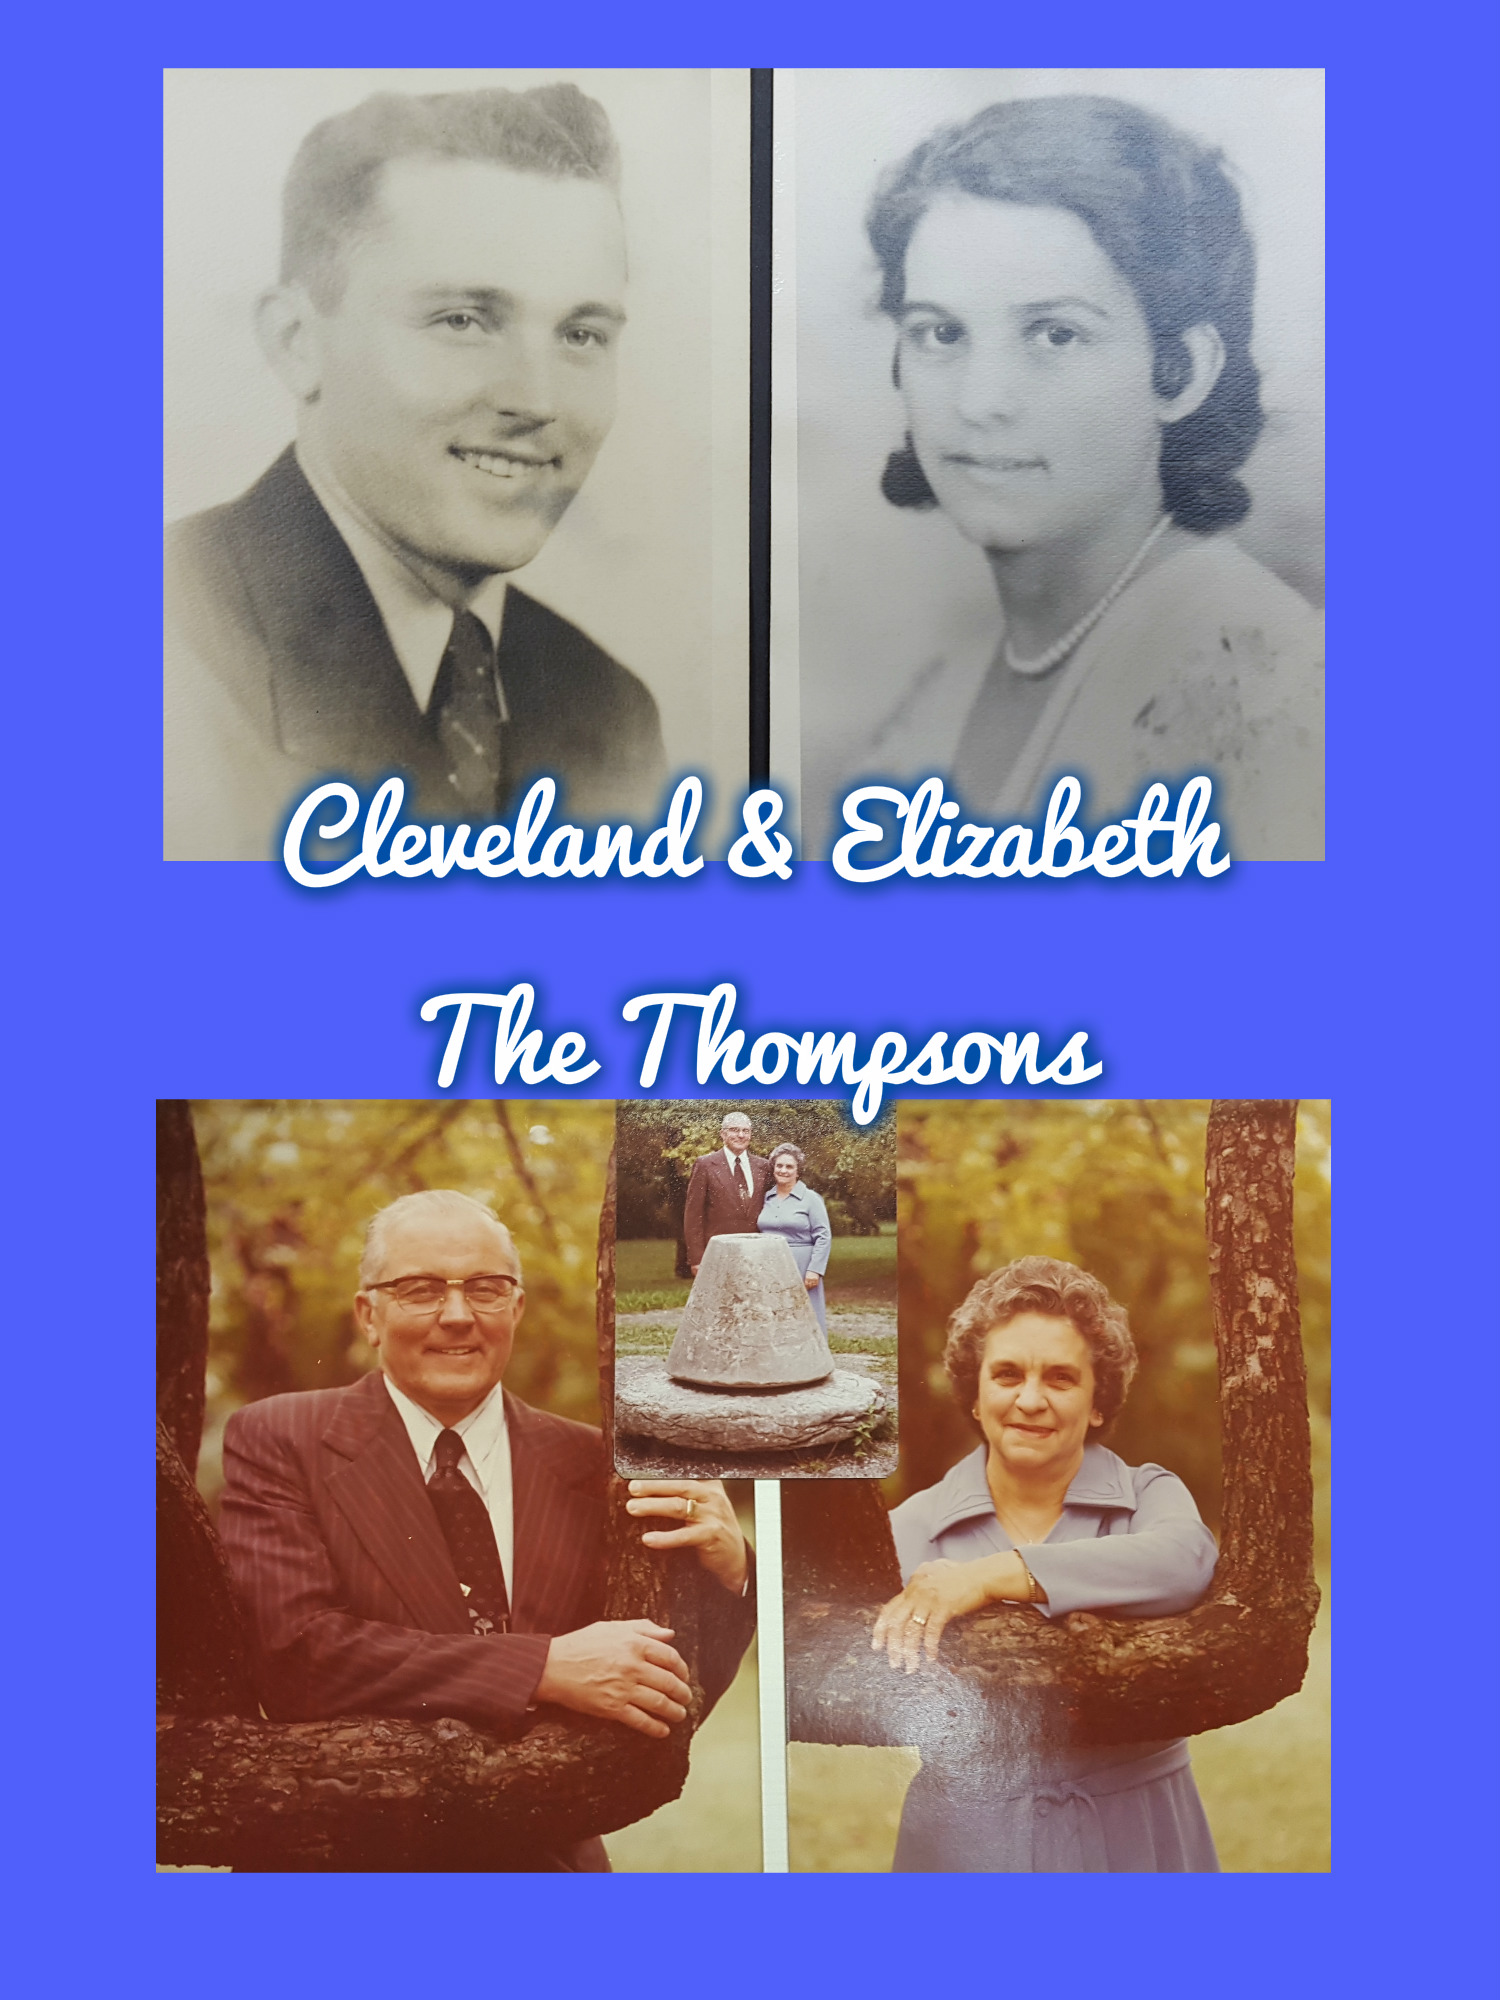 Thompson’s Foodtown - Cleveland & Elizabeth Thompson (with daughters, Carol and Ann) - 1/20/18 - # 162